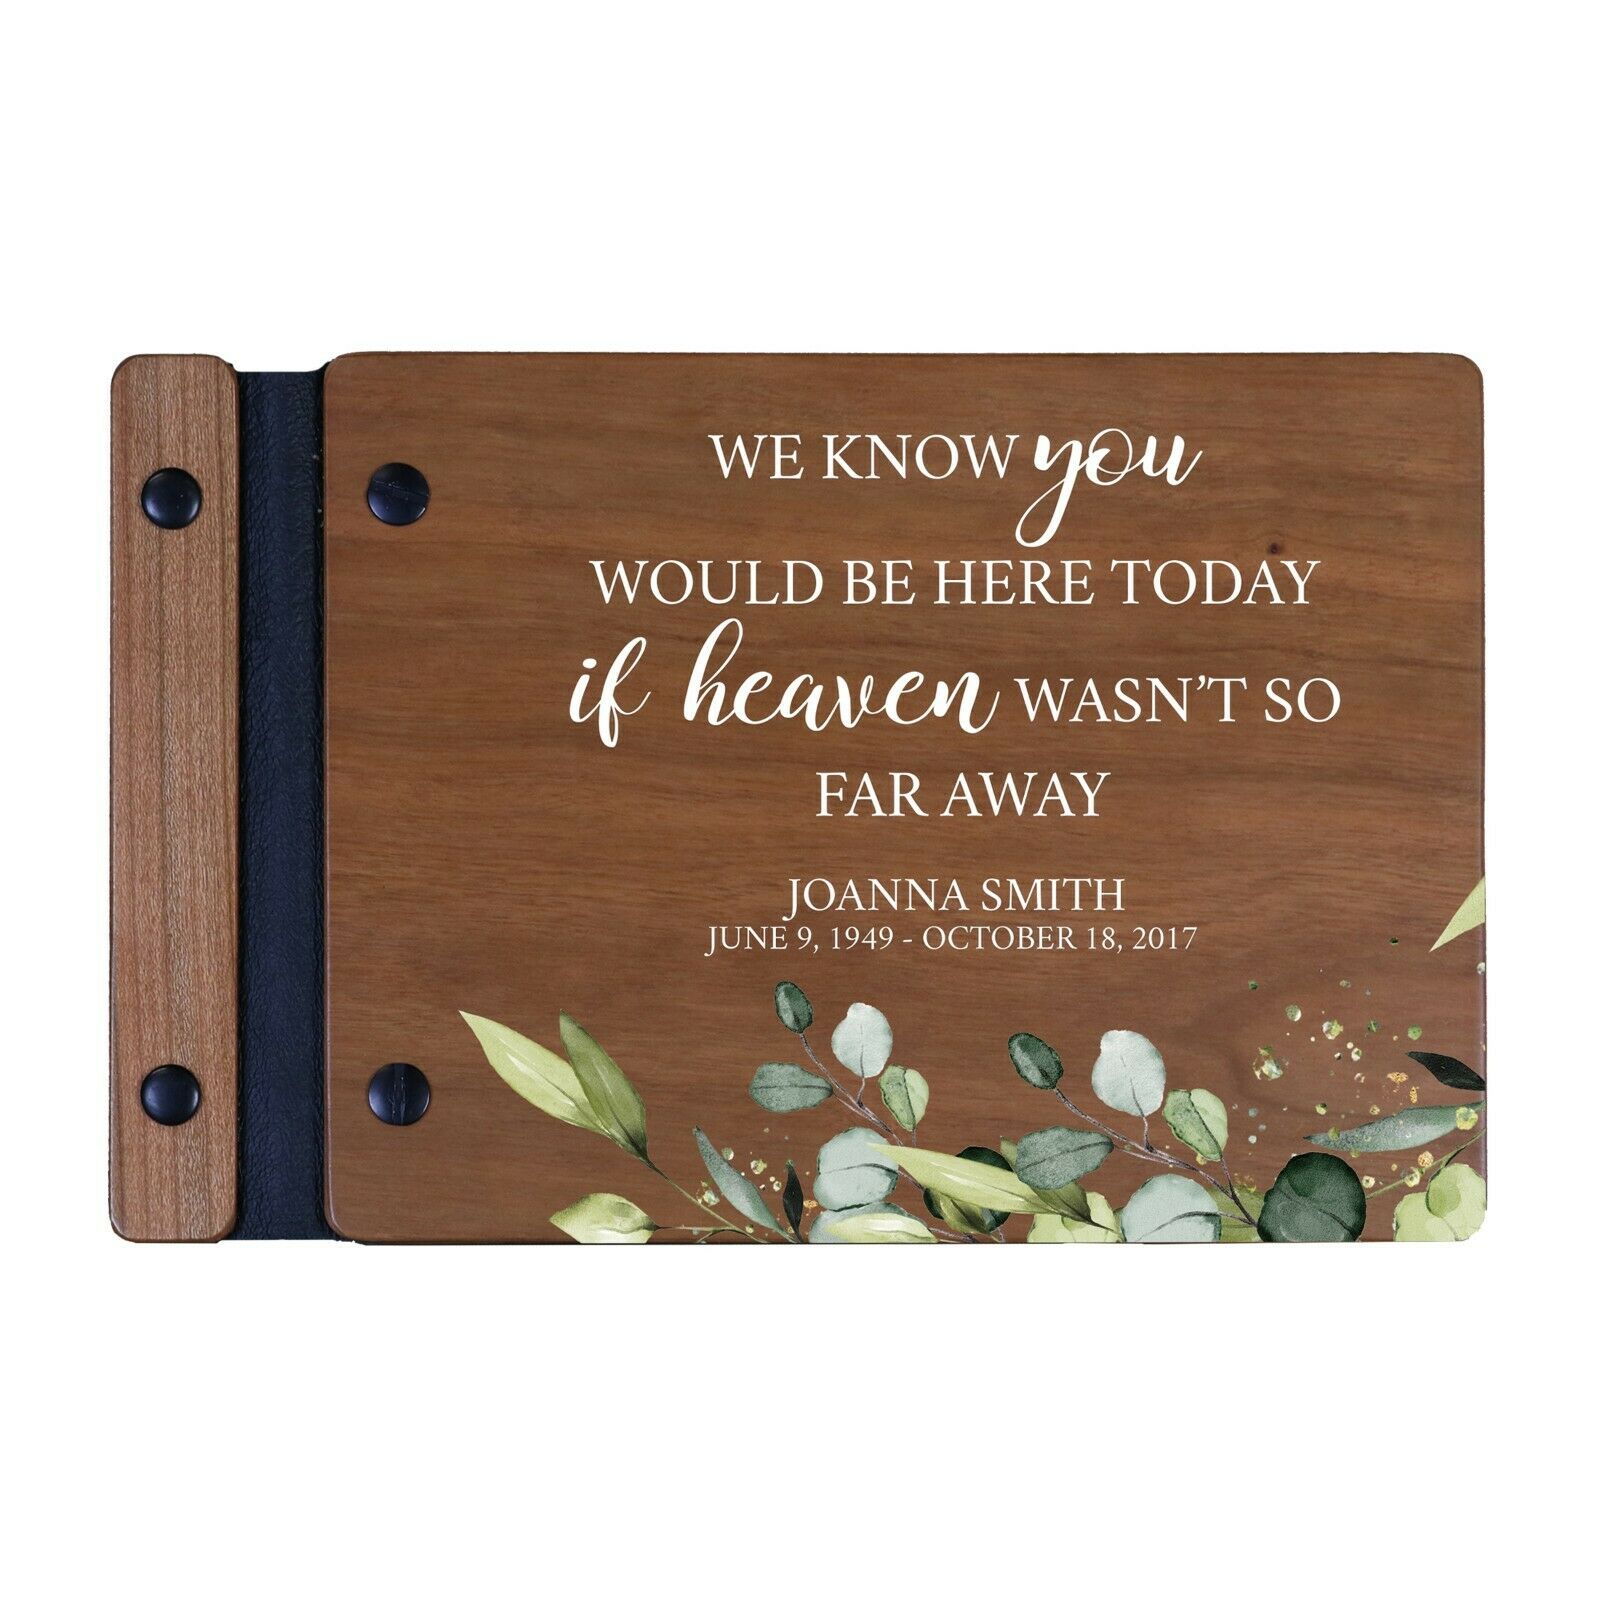 Custom Memorial Funeral Guest Book For Loss Of Loved One 9x6 - We Know You Would